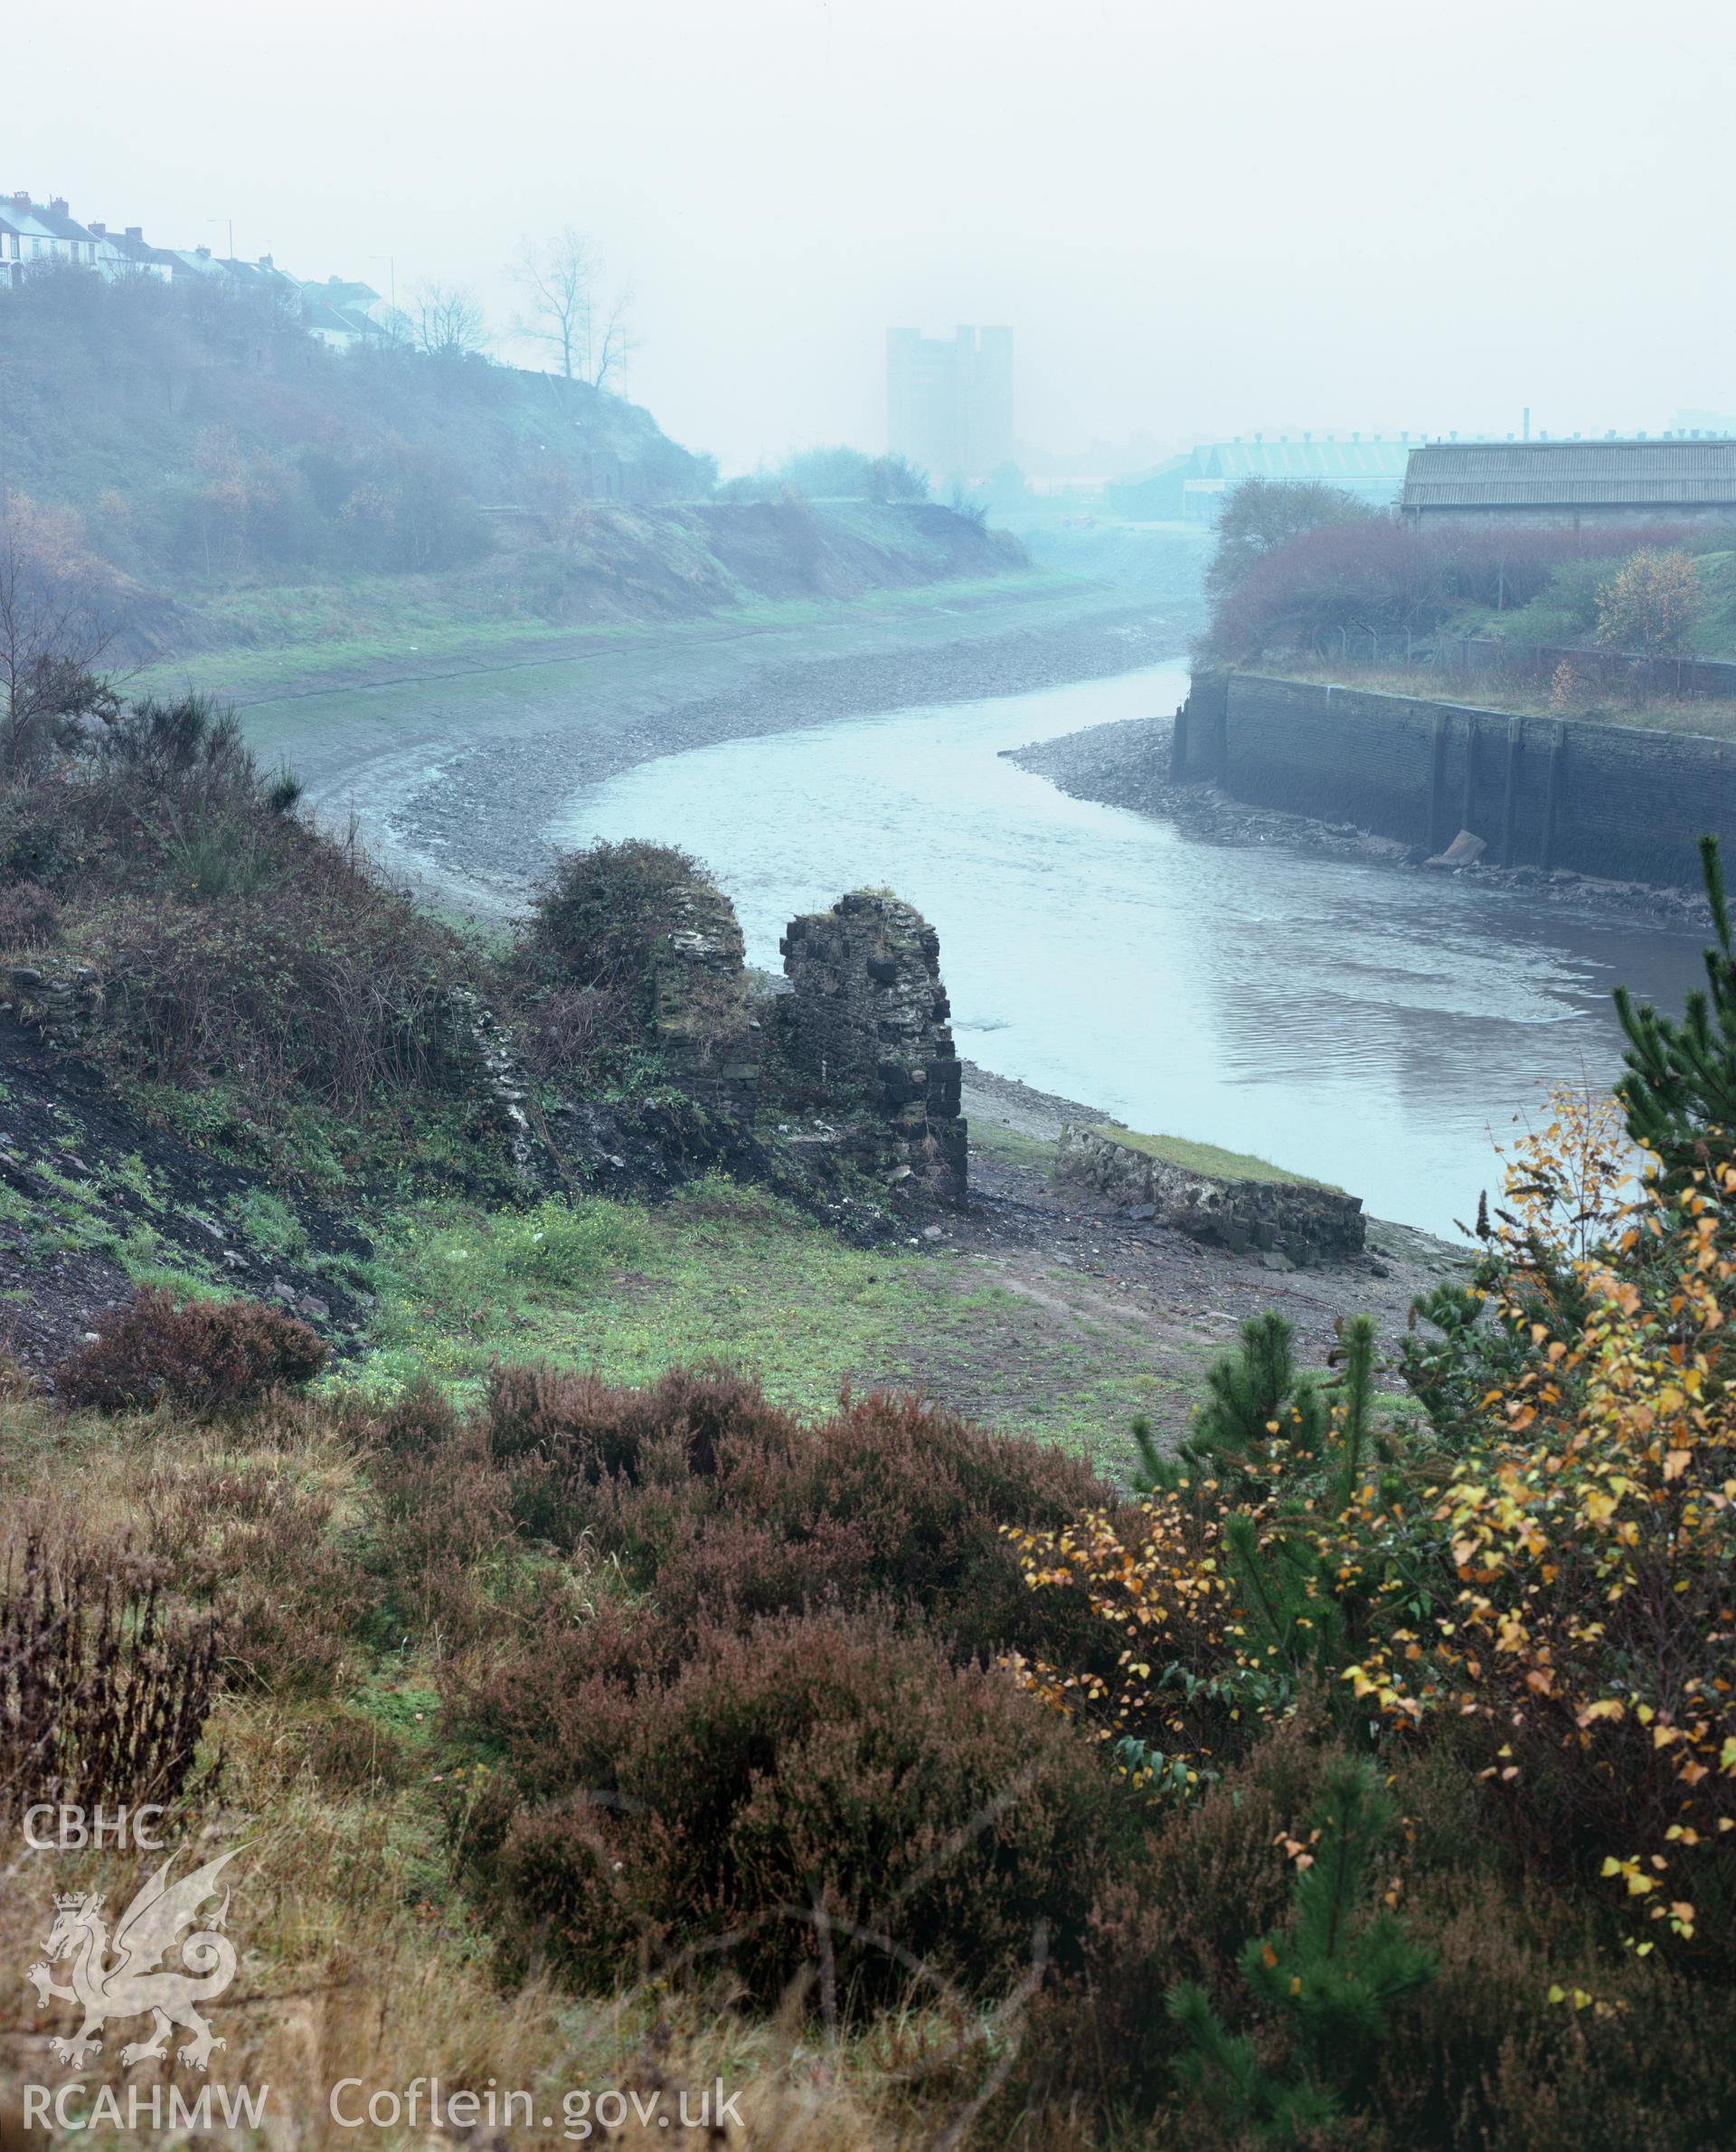 RCAHMW colour transparency showing the tipping staithes on Smith's Canal, Swansea, taken by Iain Wright, c.1981